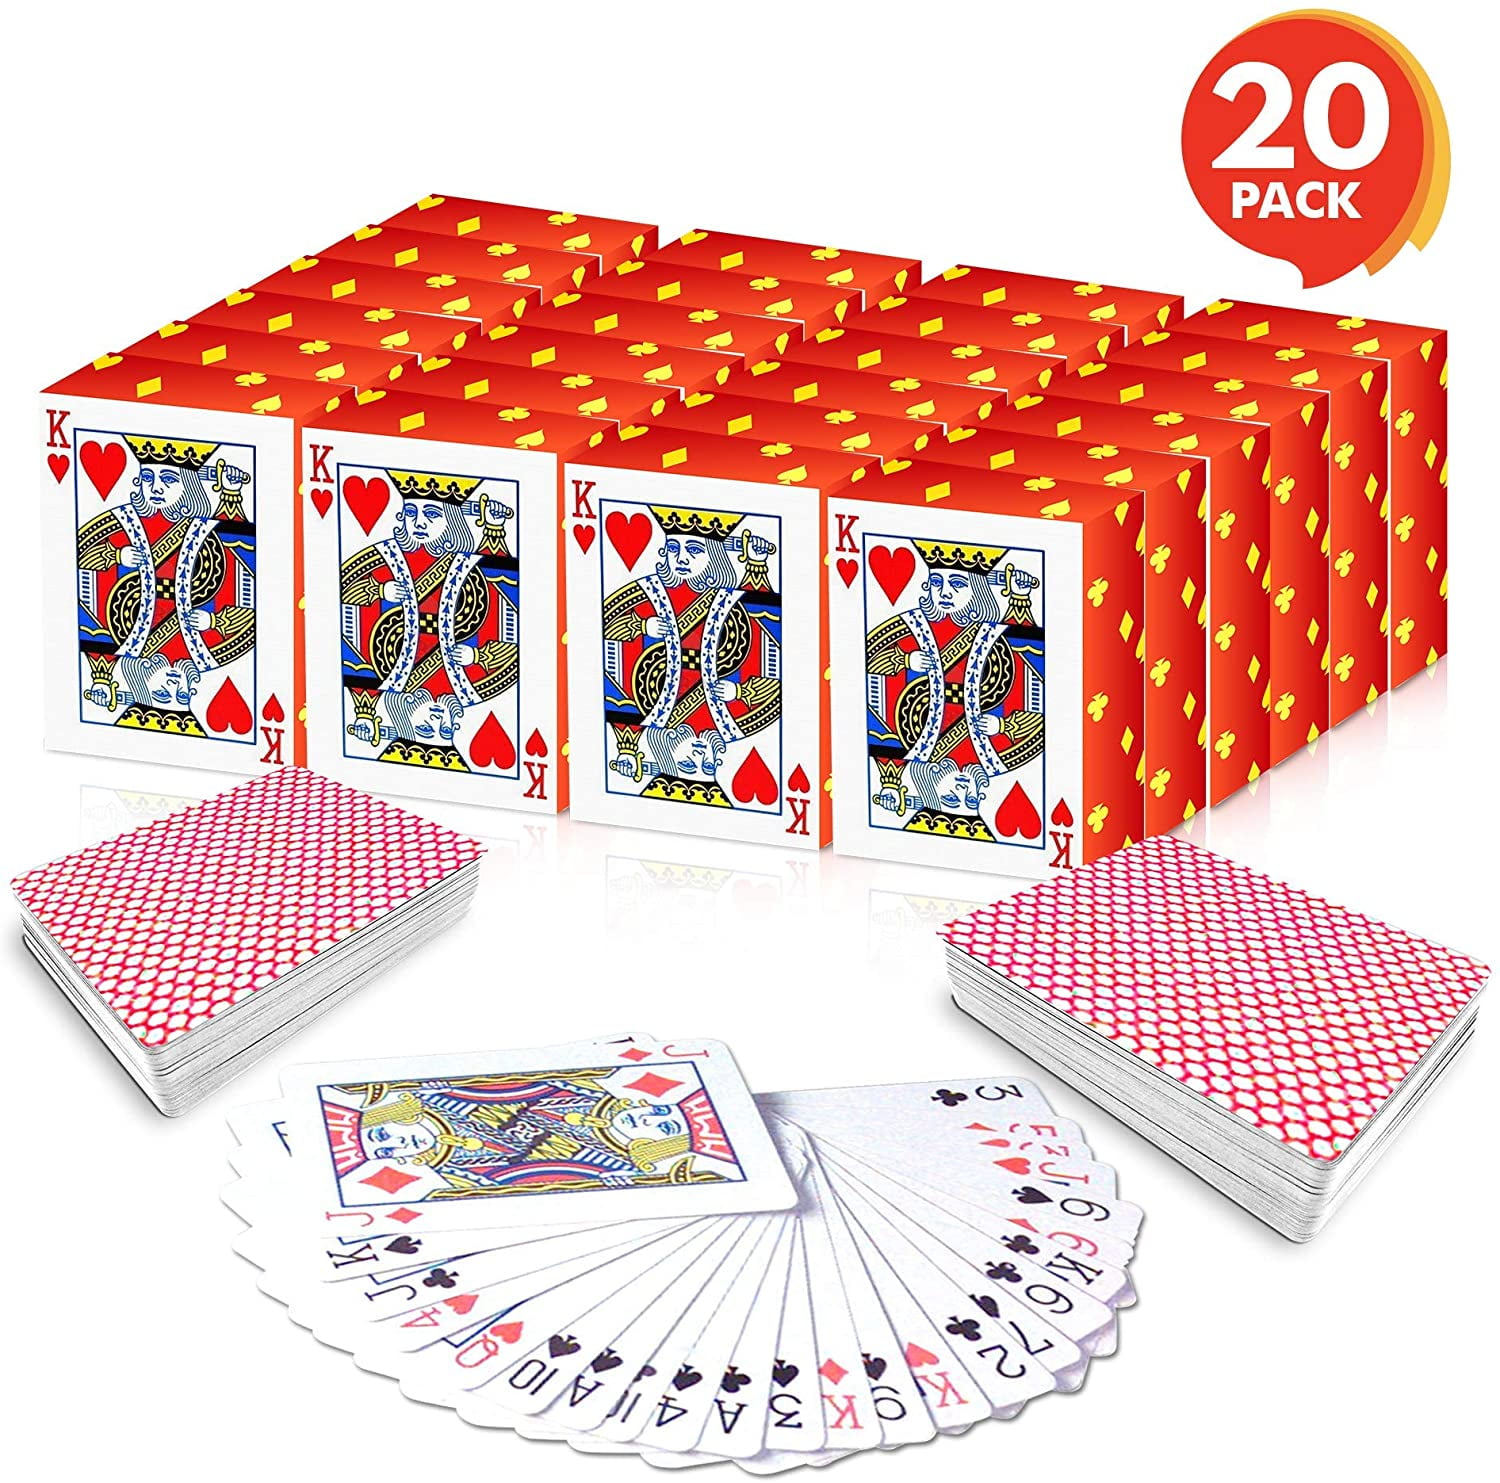 2 Packs of PLAYING CARDS Party Poker Bridge Game Toy